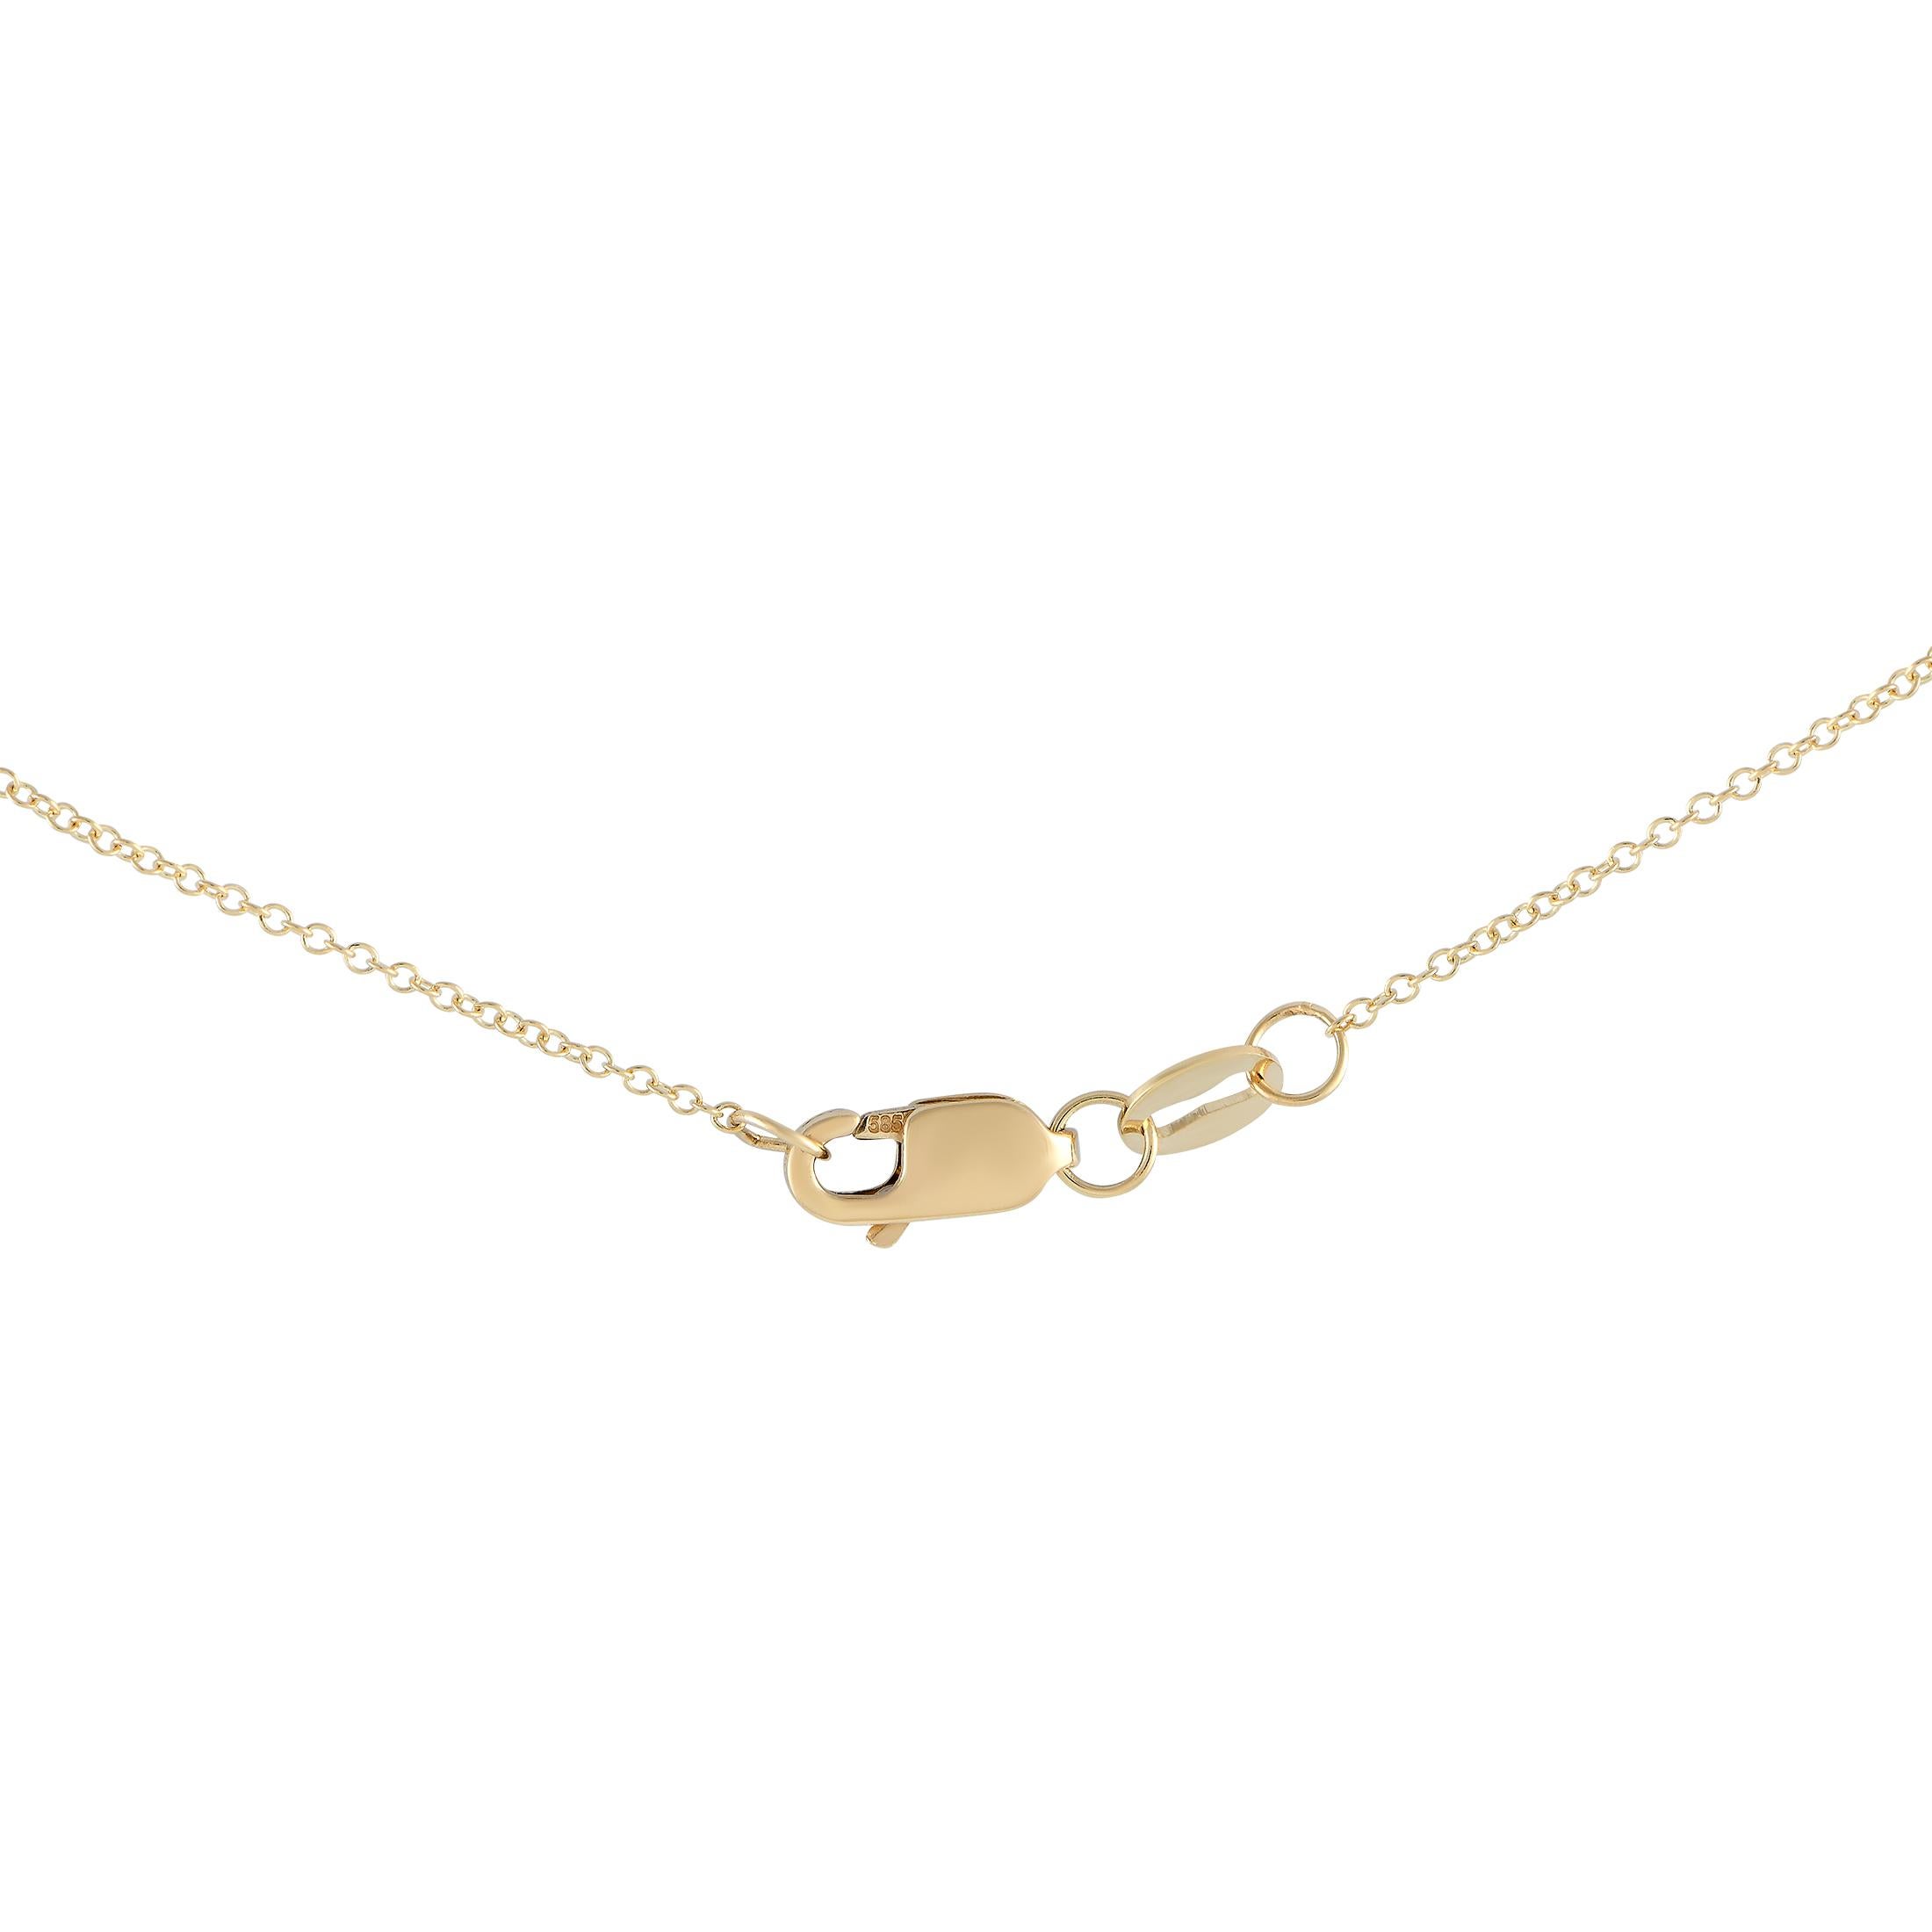 Although beautiful on its own, this station necklace is best worn layered with minimalist necklaces. The chain measures 16 inches long and features seven petite charms stationed at specific points along the chain. Each charm features two baguette